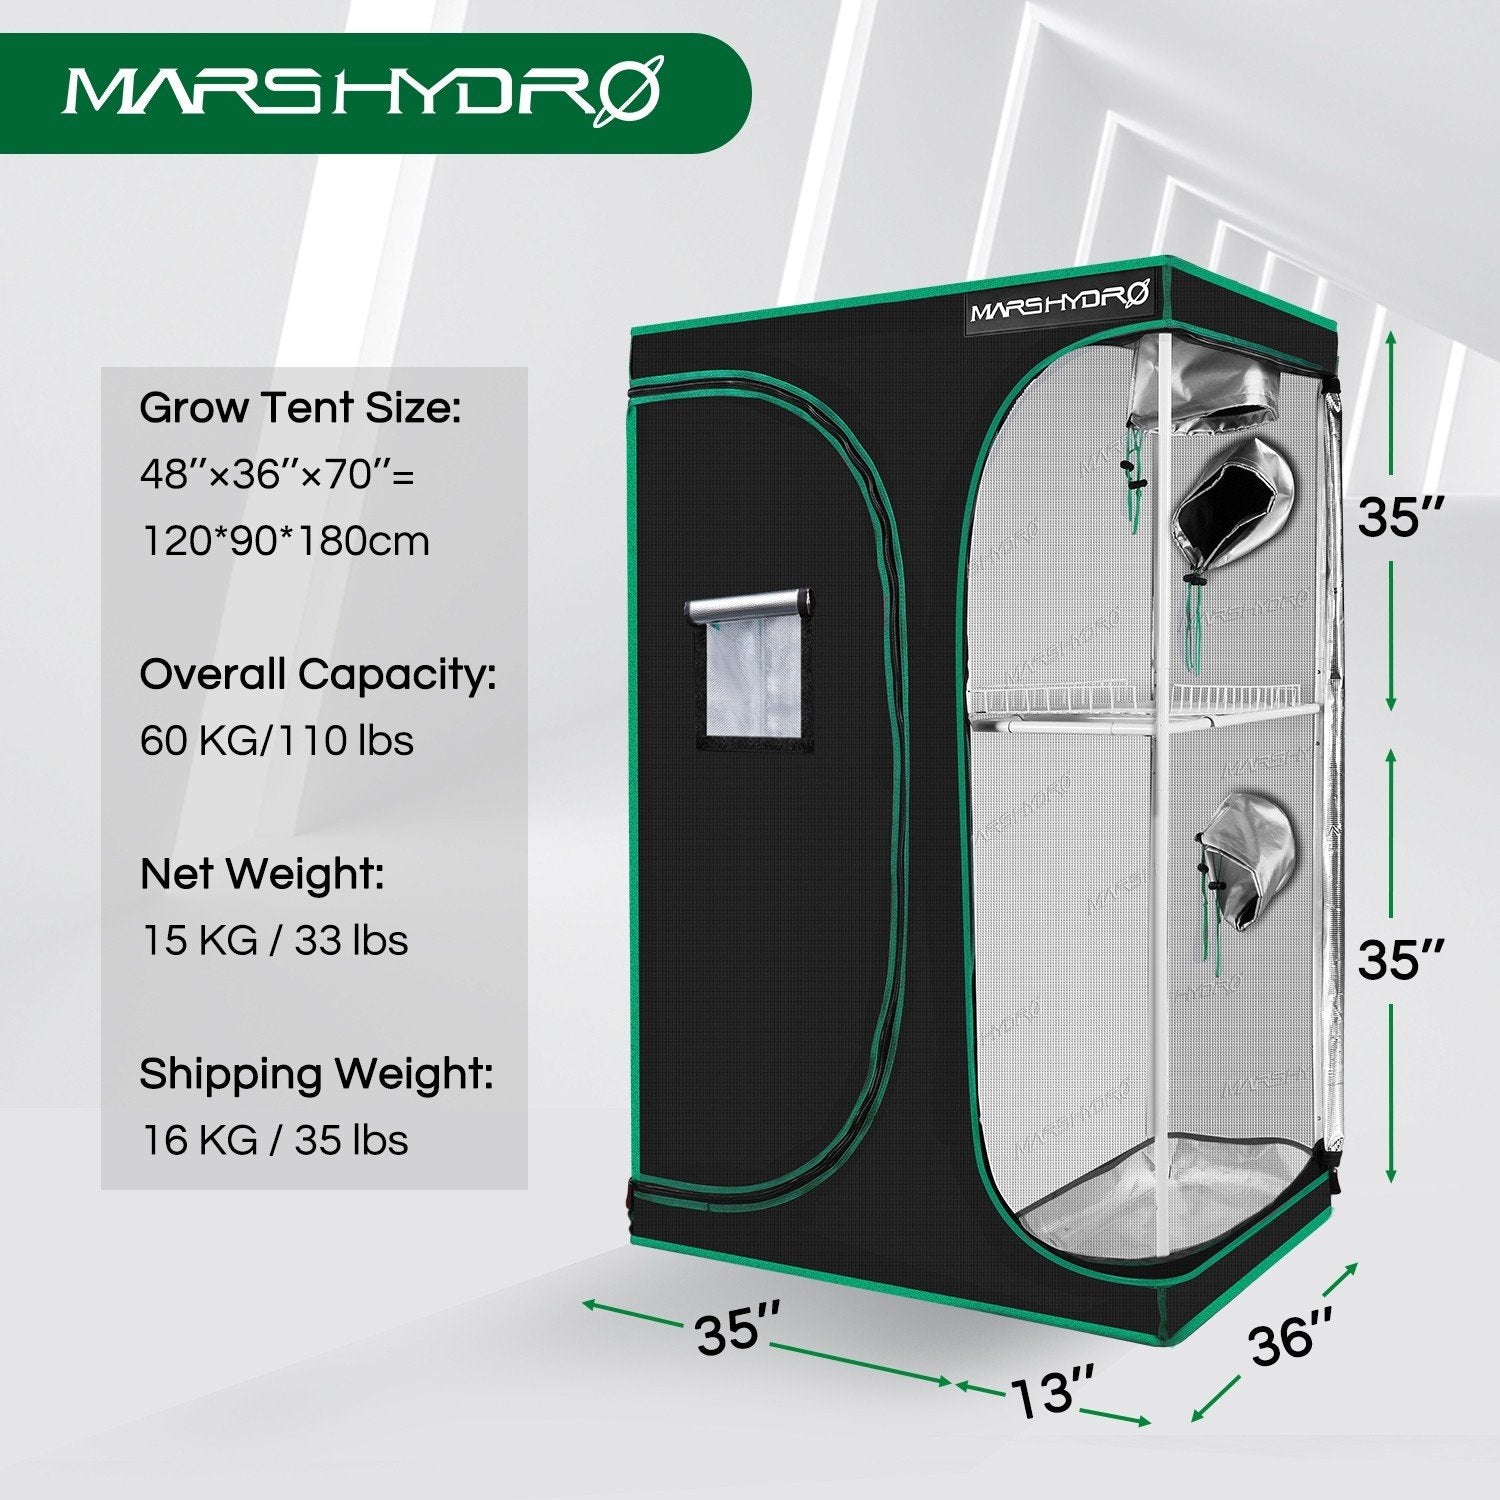 Product Secondary Image:Mars Hydro Grow Tent 4' x 2.6' x 6' (2in1)